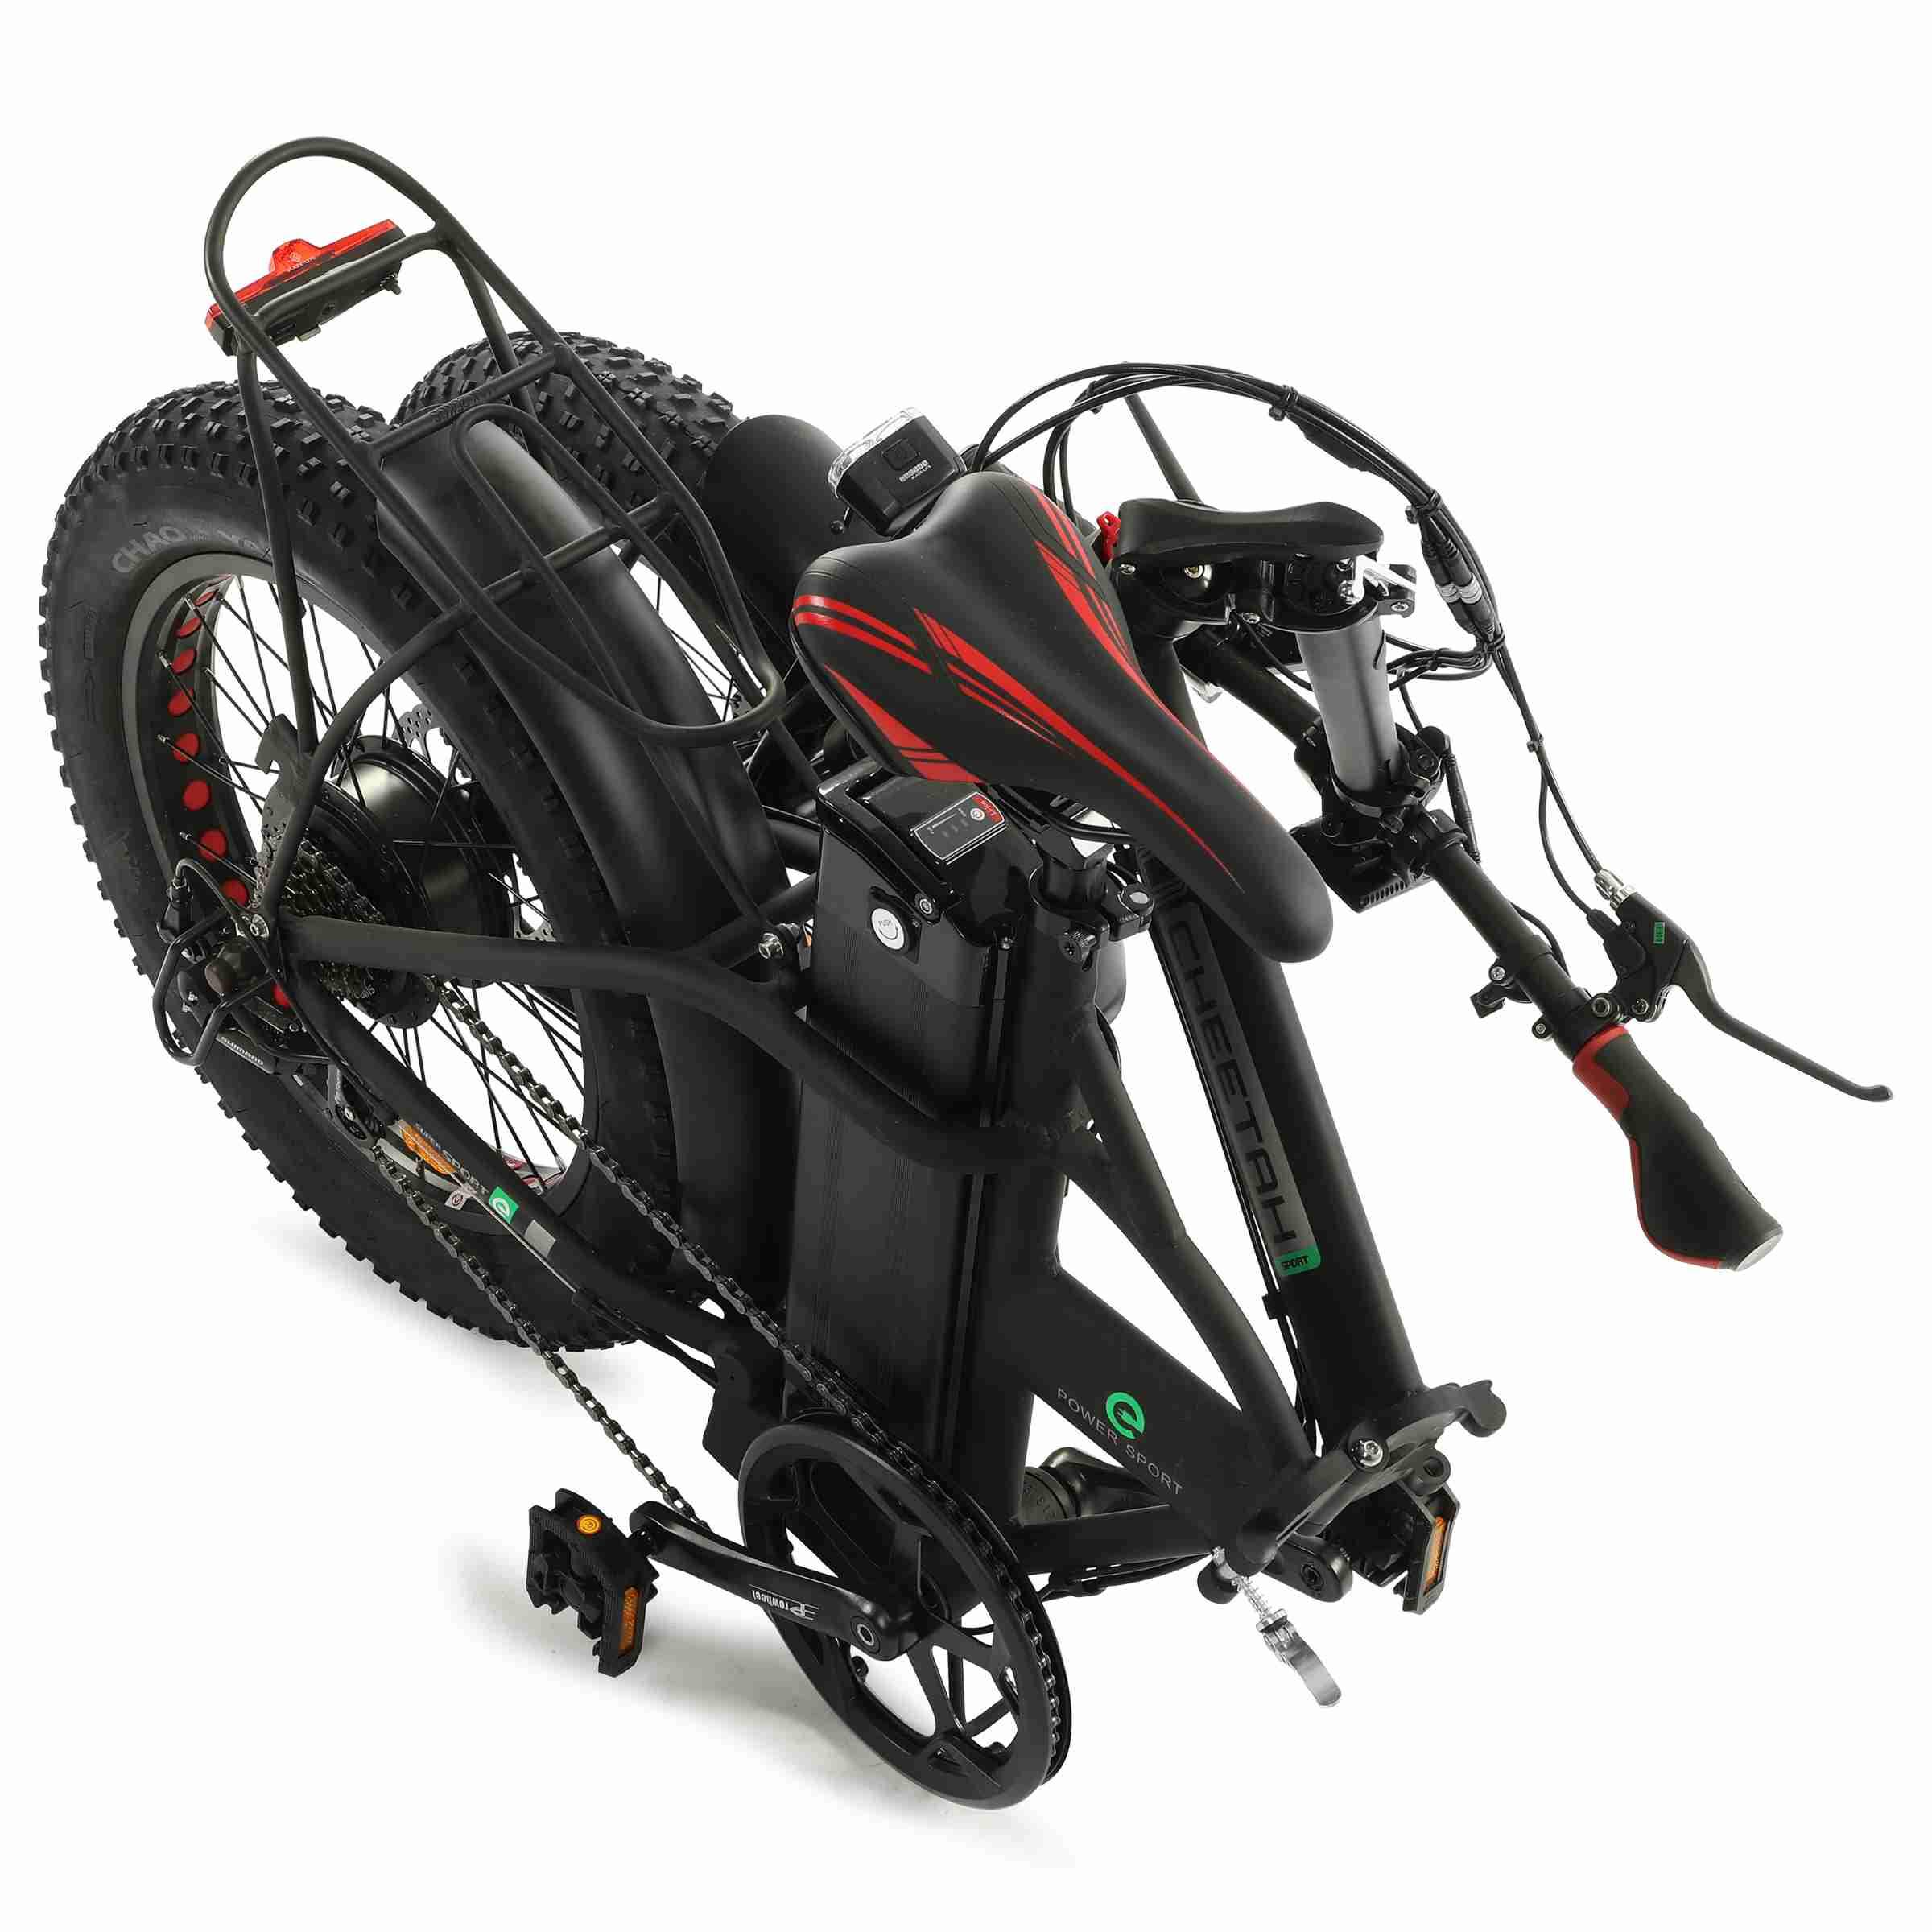 48V Fat Tire Portable and Folding Electric Bike with color LCD display - 2